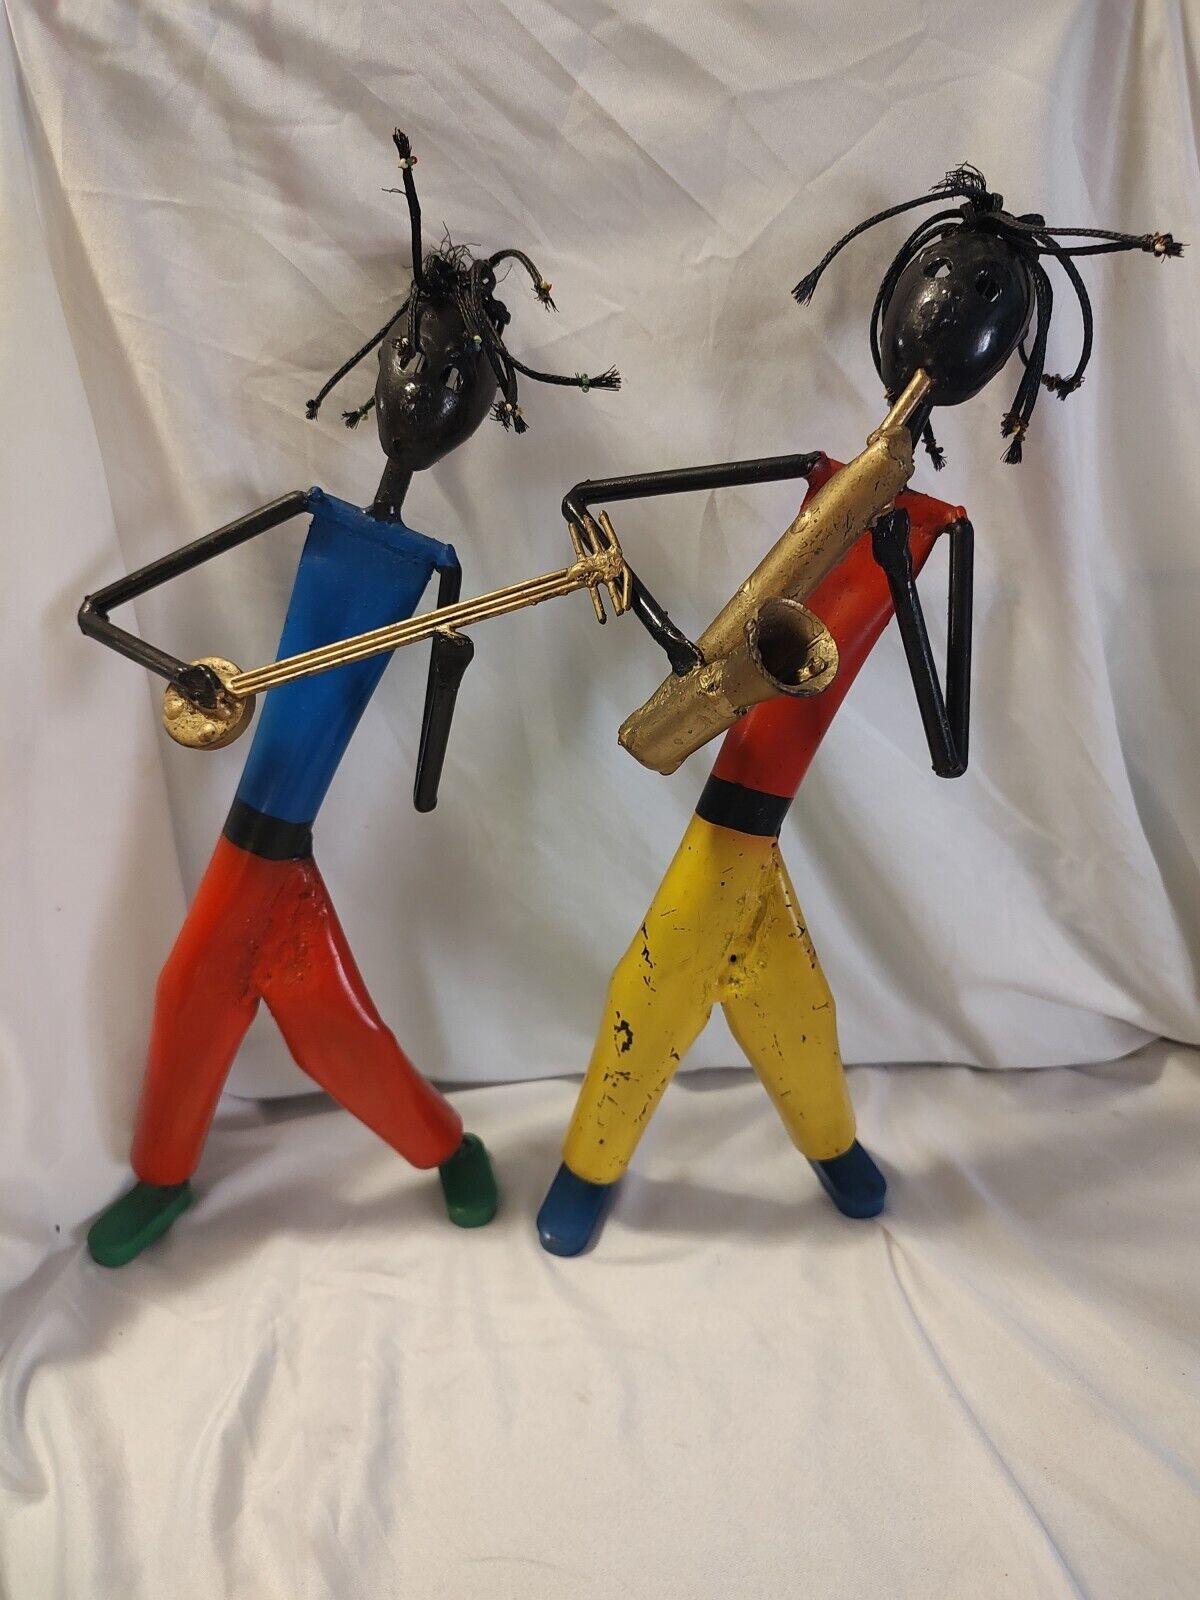 🔥 2X South Africa Band Metal Saxophone And Guitar 16” Welded Figures Rare